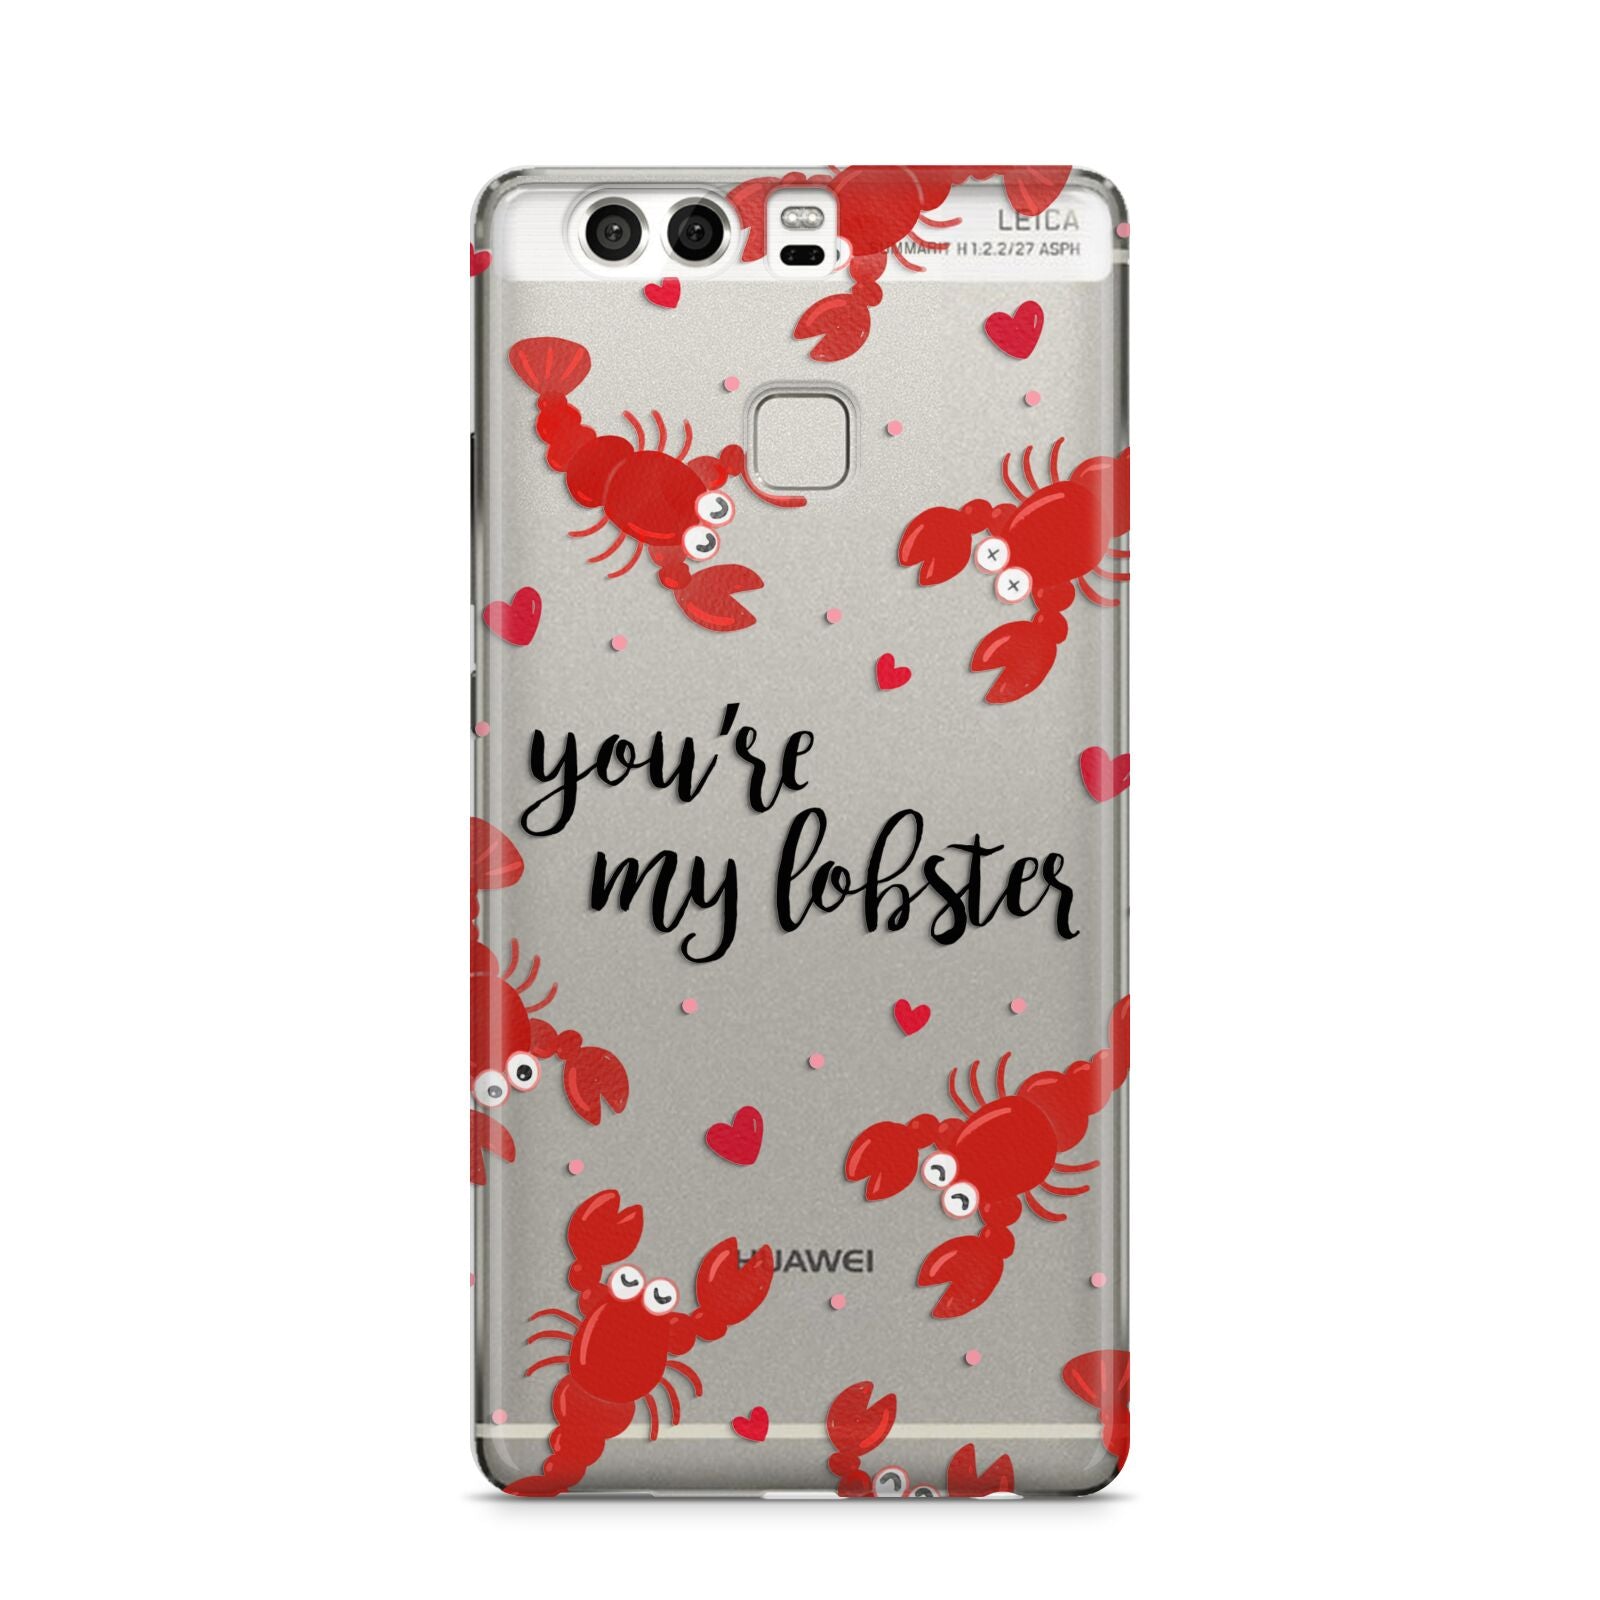 Youre My Lobster Huawei P9 Case